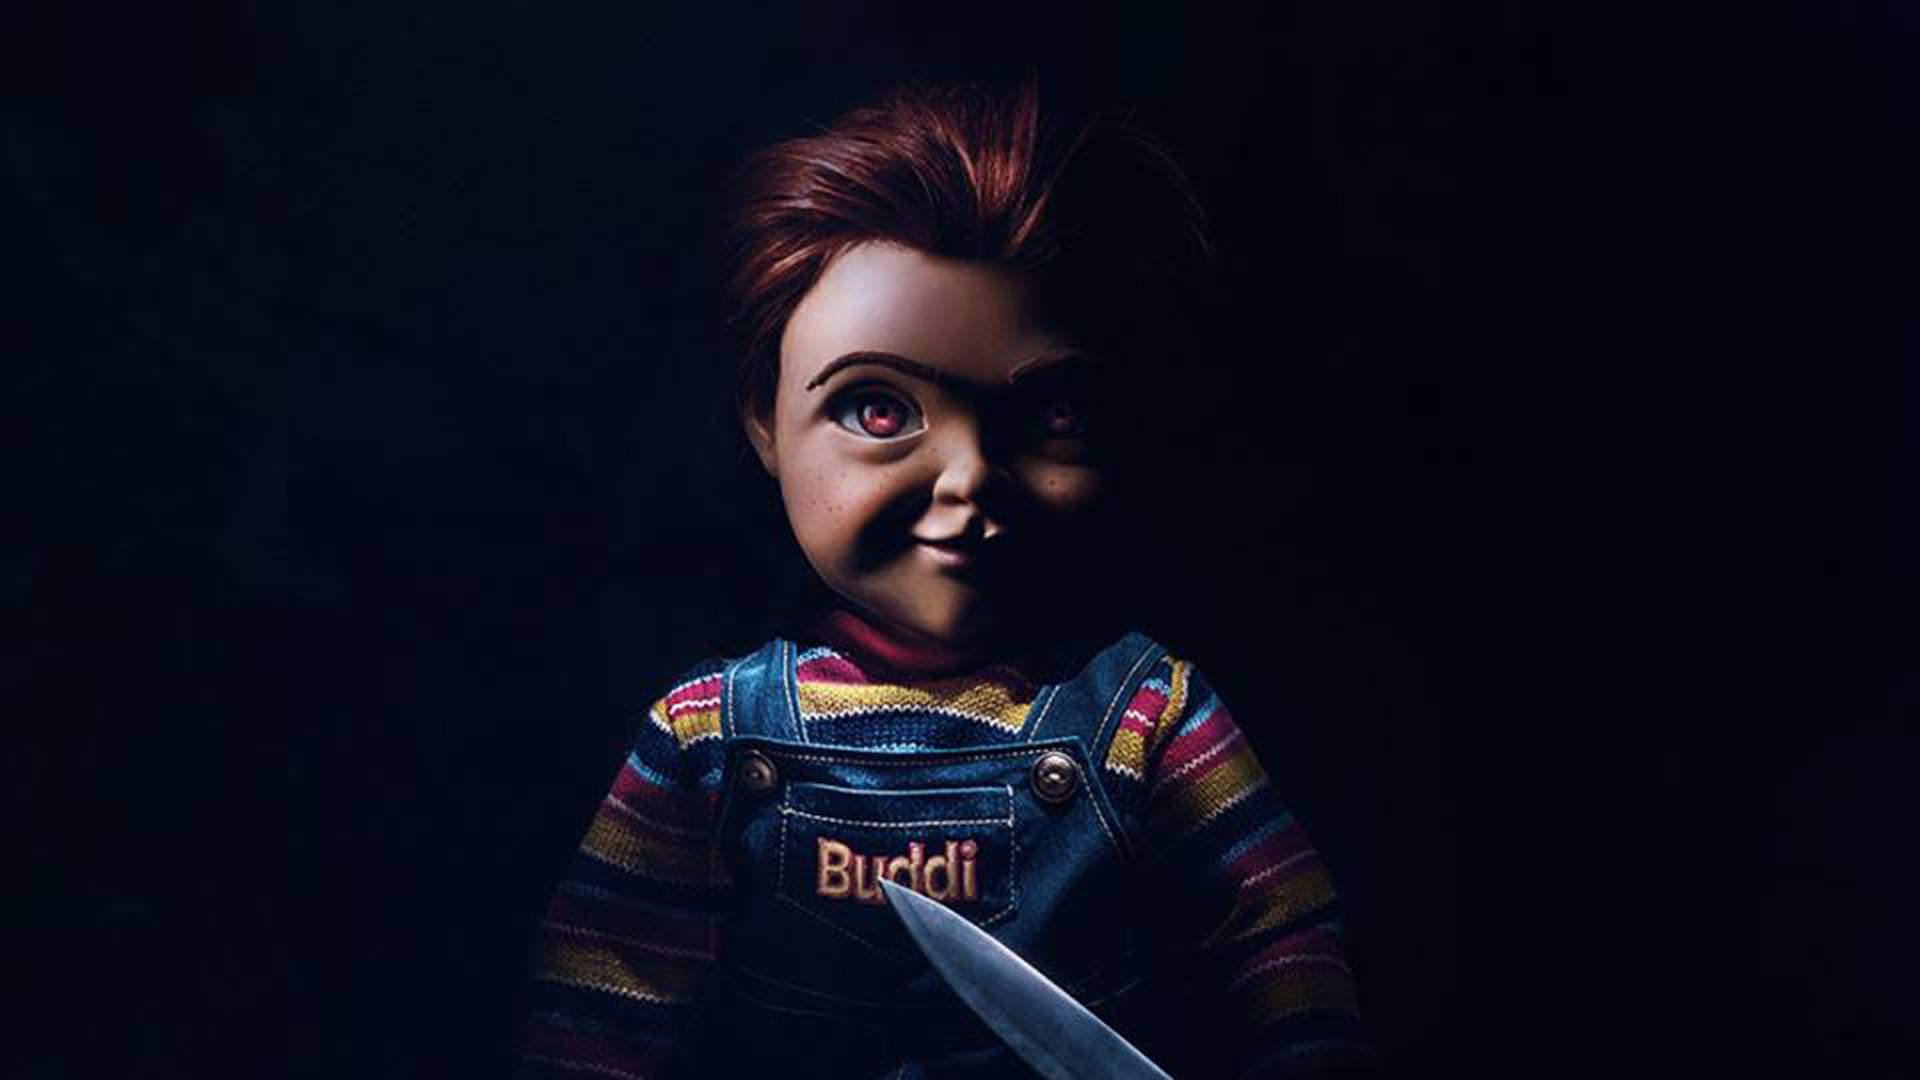 Chucky Is Up to His Old Killer Doll Tricks In the Latest Trailer for the New 'Child's Play' Remake